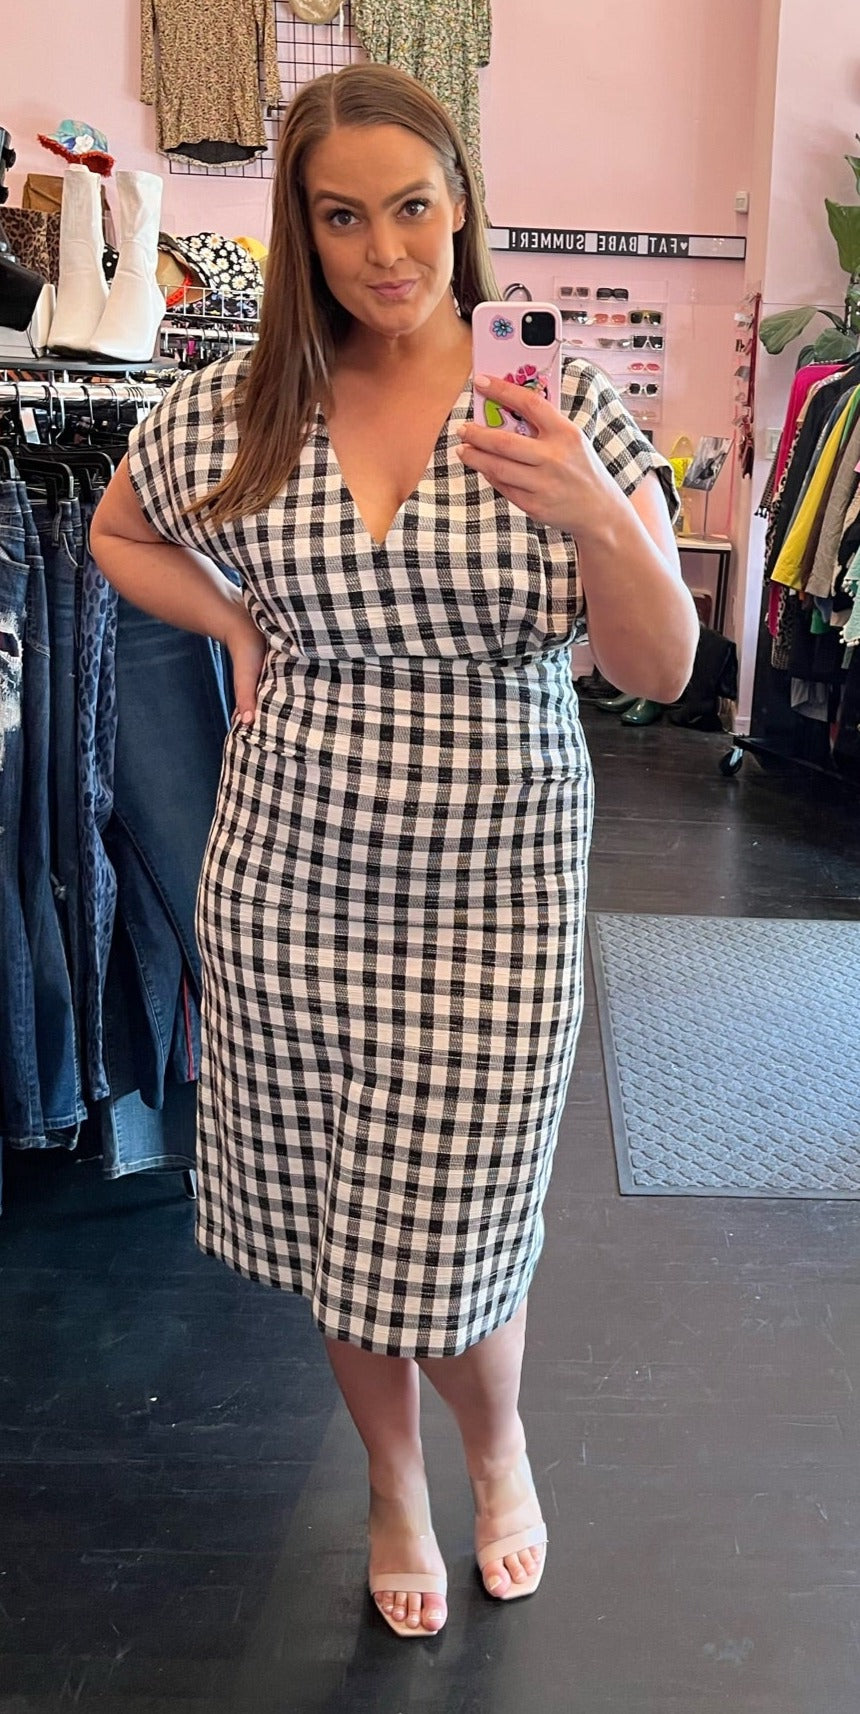 Full-body front view of a size 16 Derek Lam drop-shoulder v-neck black and white gingham midi dress styled with nude heels on a size 16 model. The photo is taken inside under flourescent lighting.